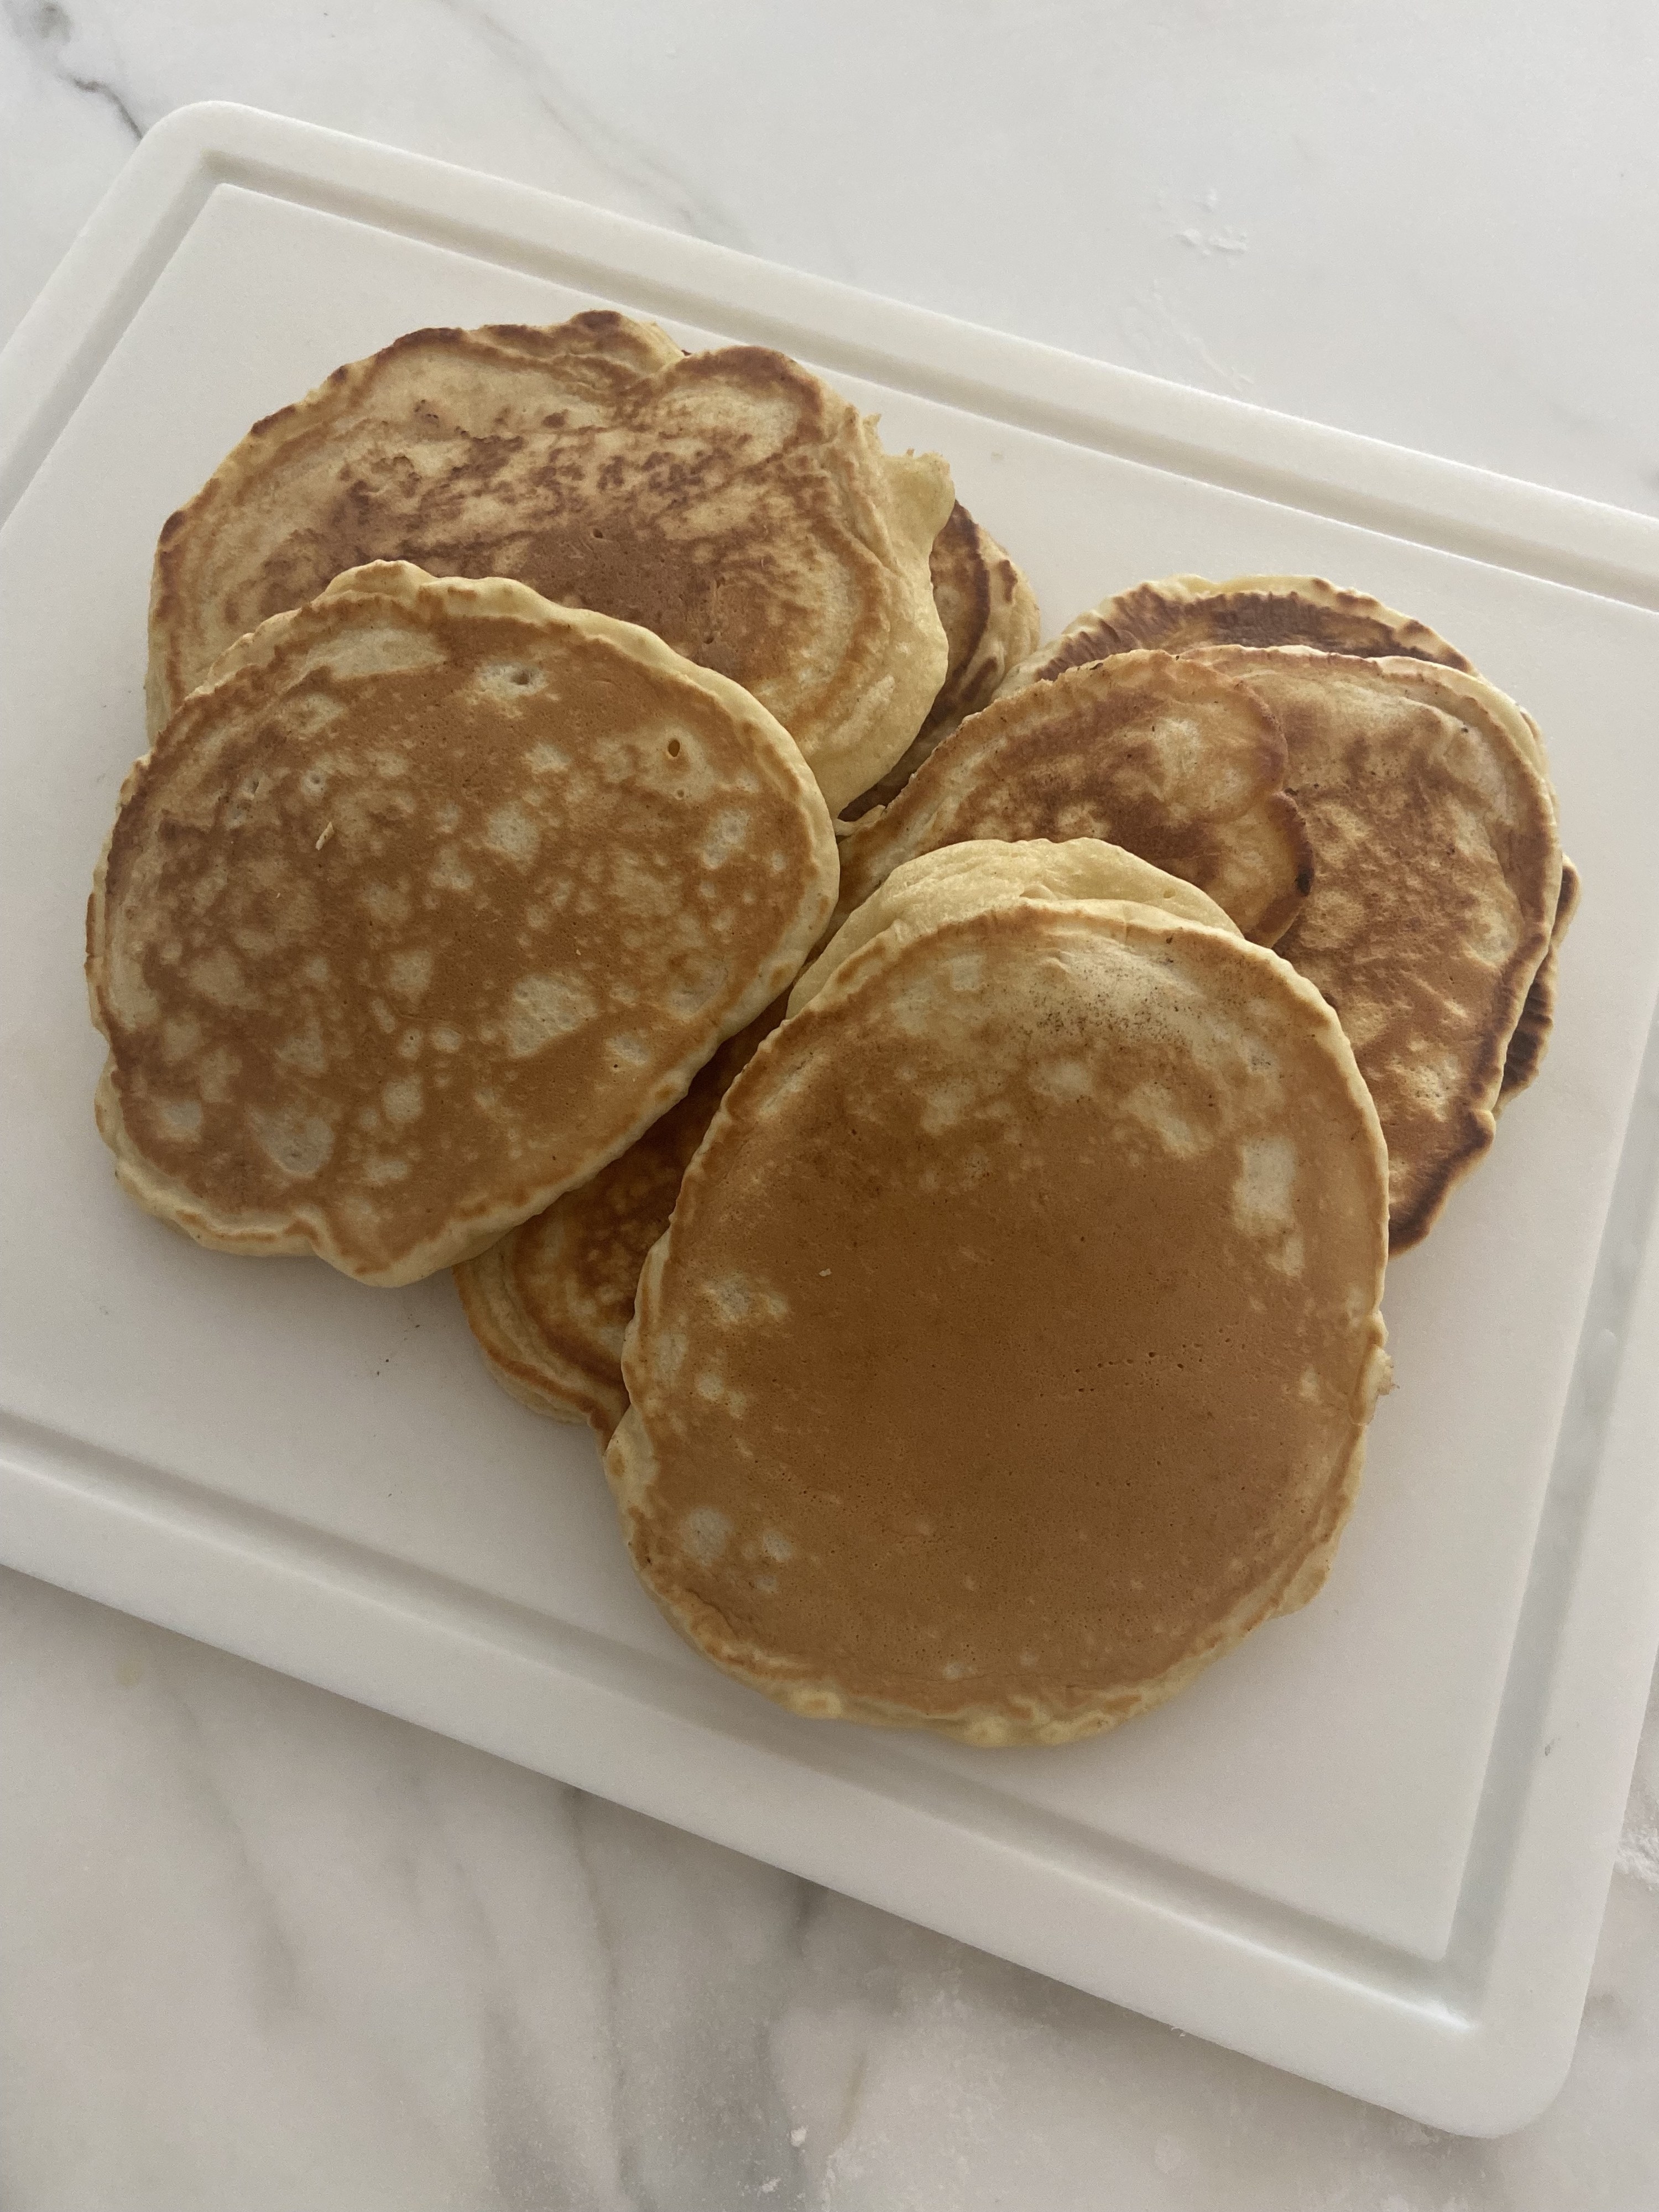 A stack of several pancakes that look similar to the third one pictured above